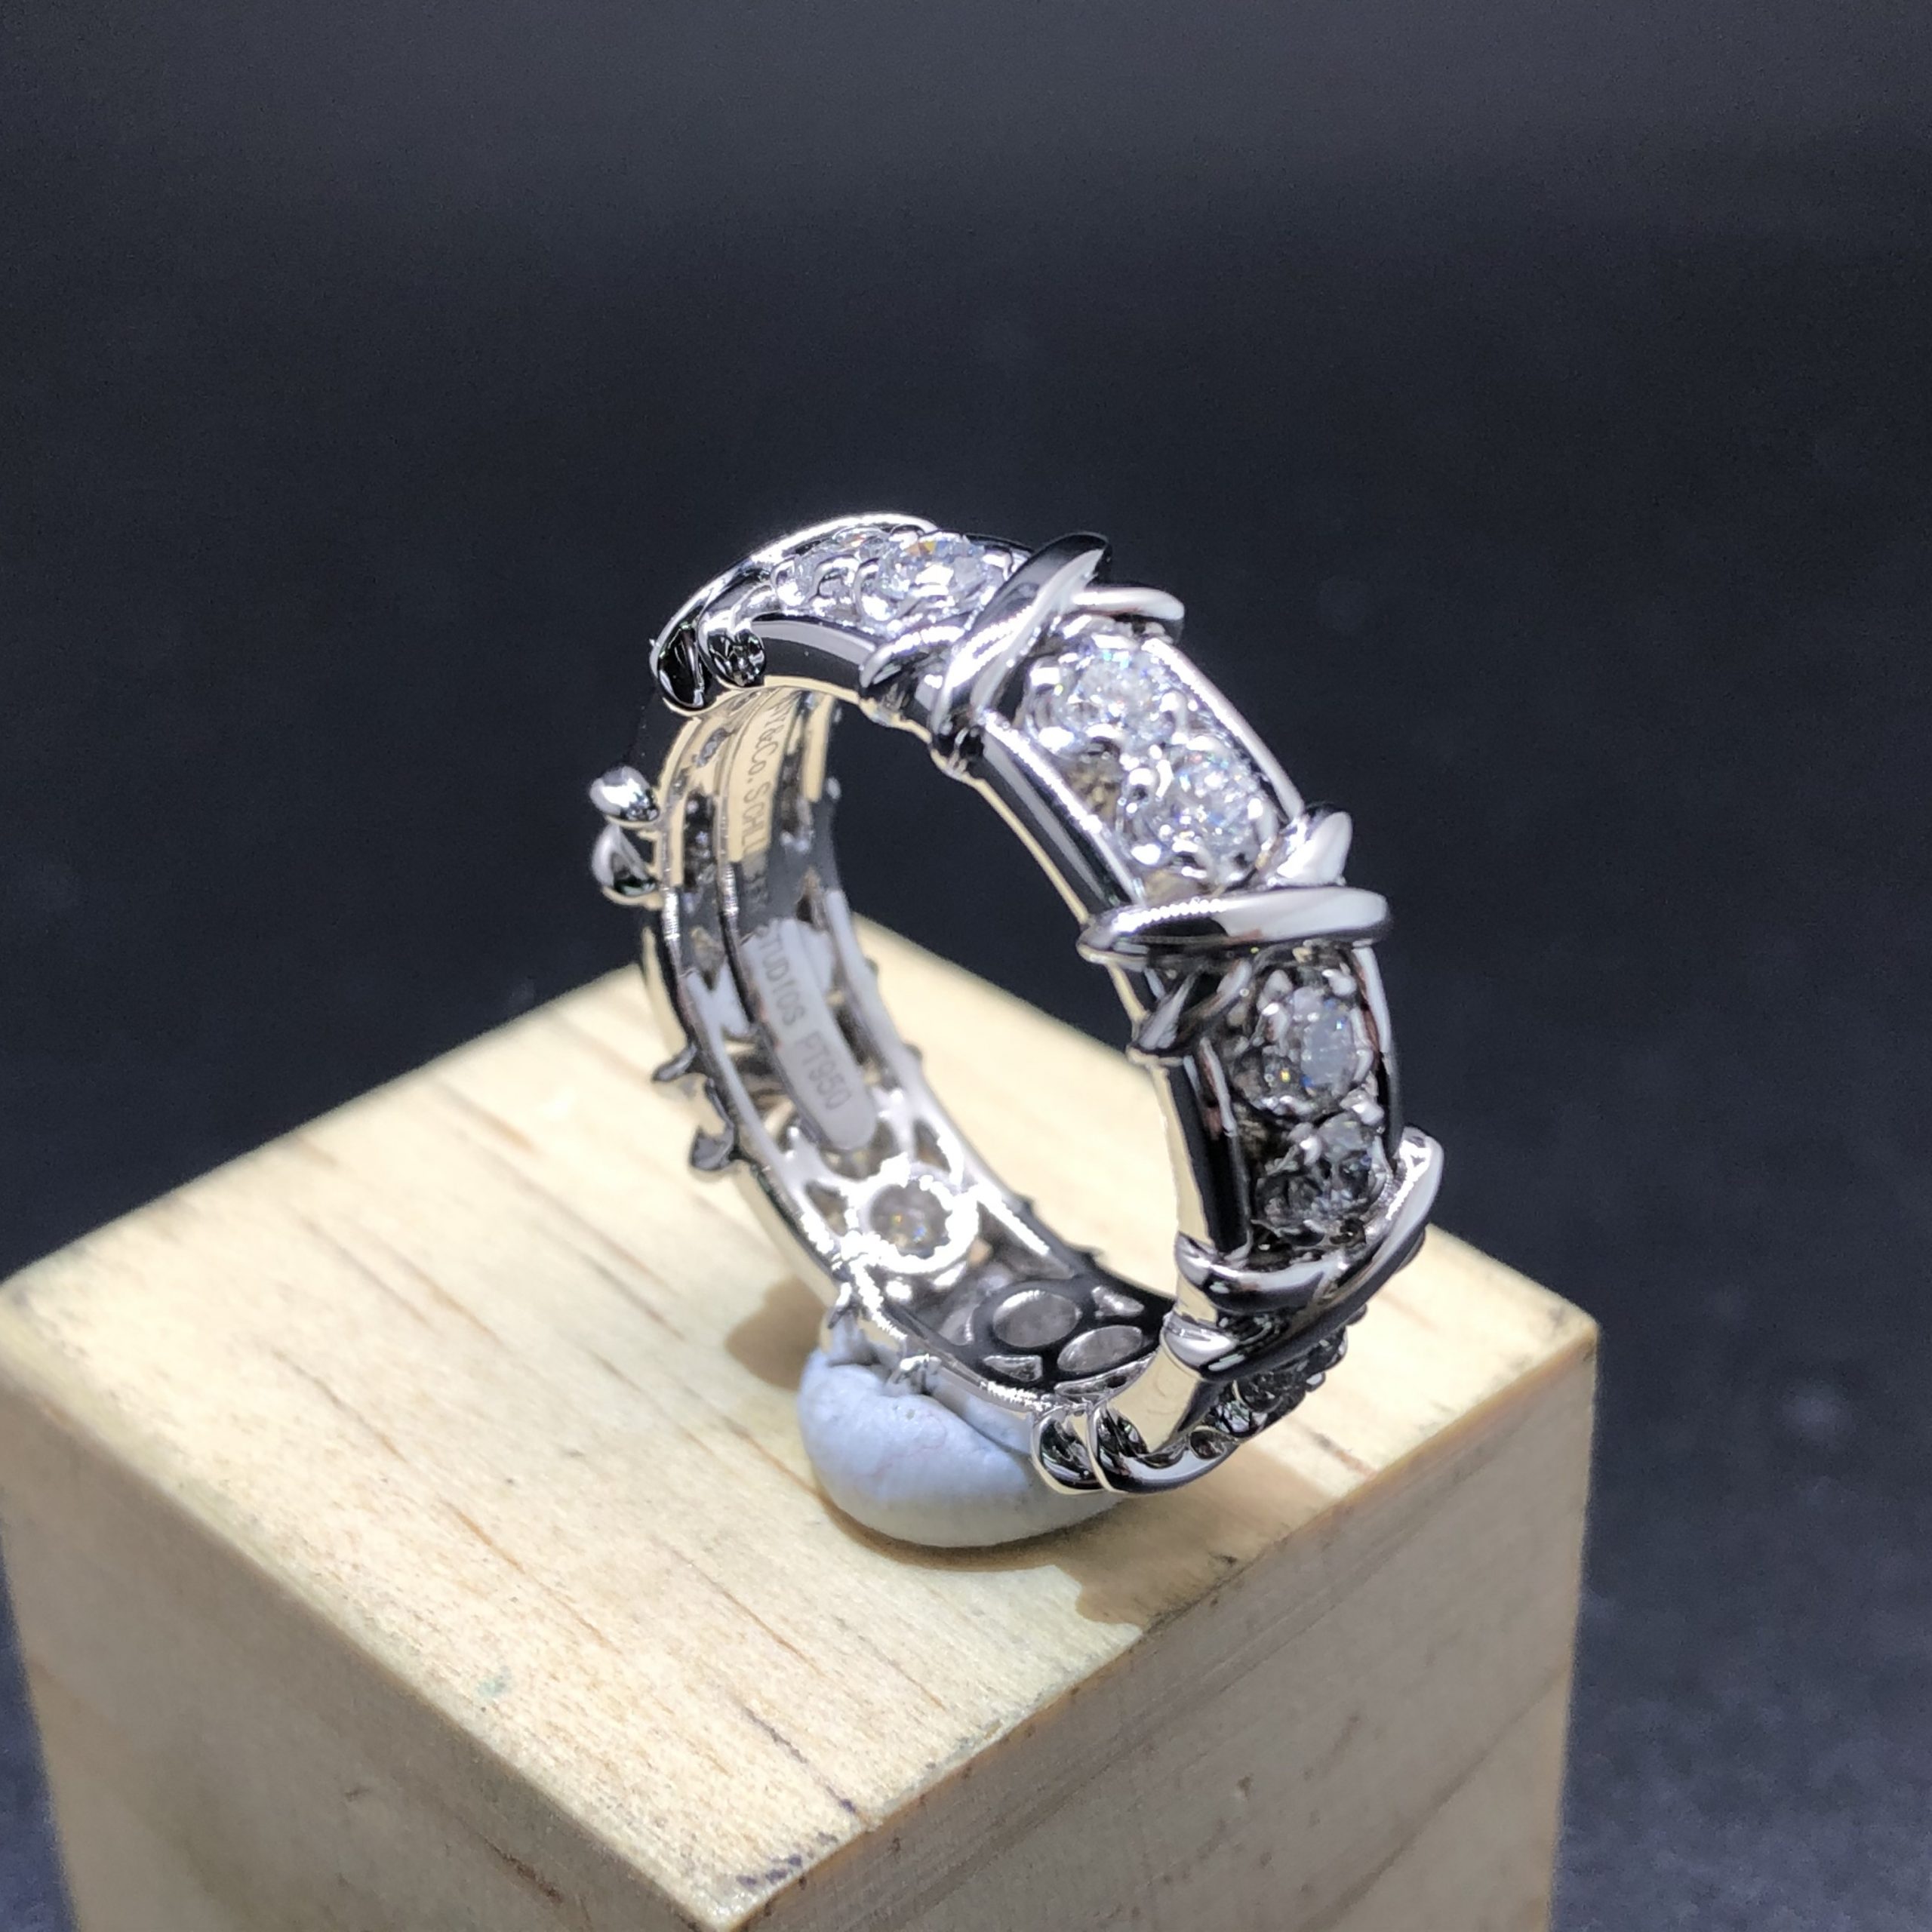 Custom Made Tiffany & Co. Schlumberger Sixteen Diamonds Ring in 18K White Gold and Platinum